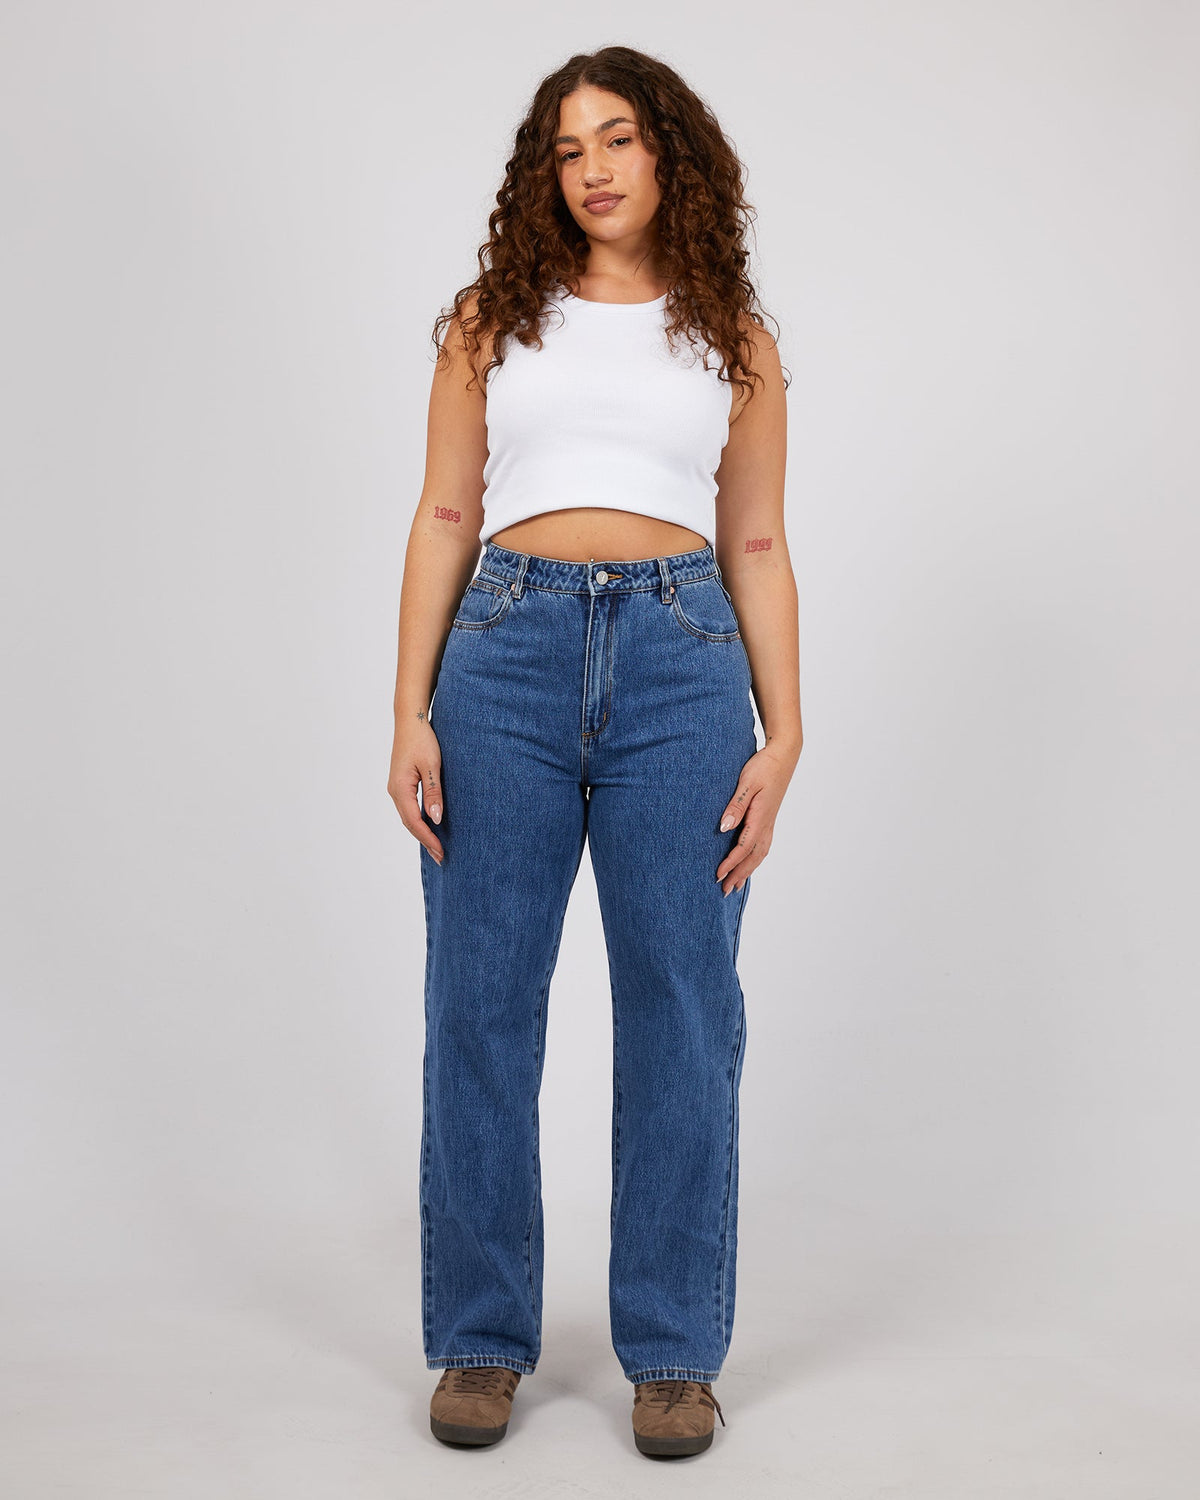 A Brand-A Carrie Jean Daria Mid Vintage Blue-Edge Clothing